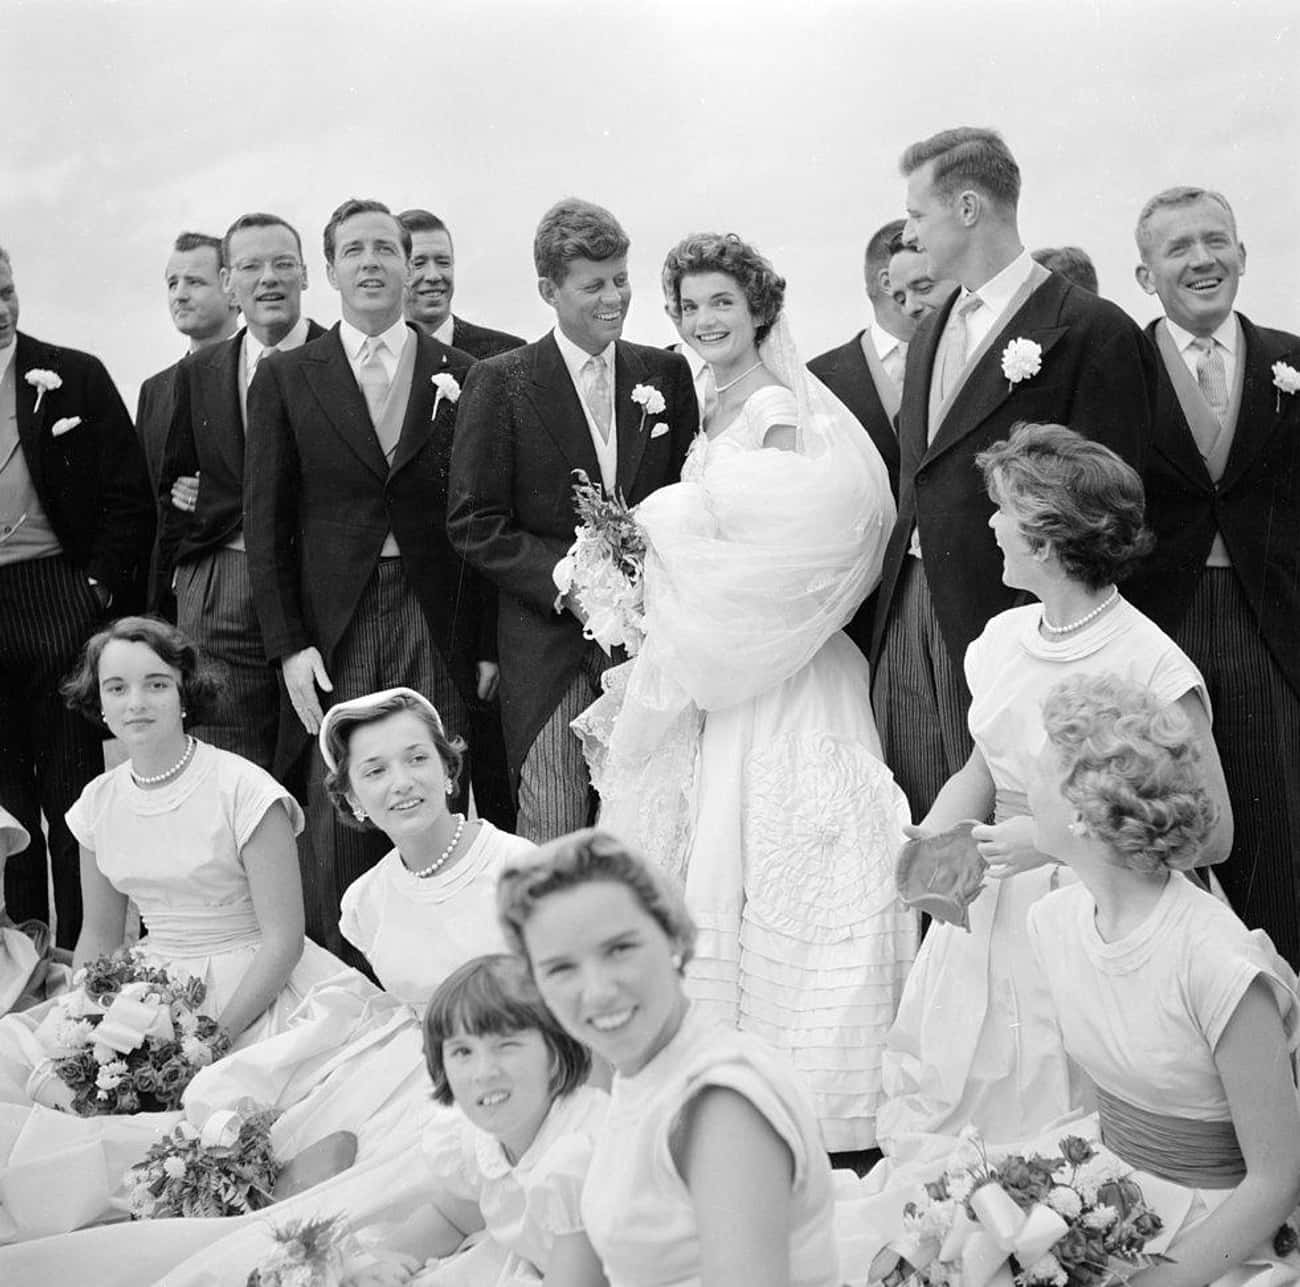 The Dresses Of The Bride And Bridesmaids Were Destroyed Days Before The Wedding